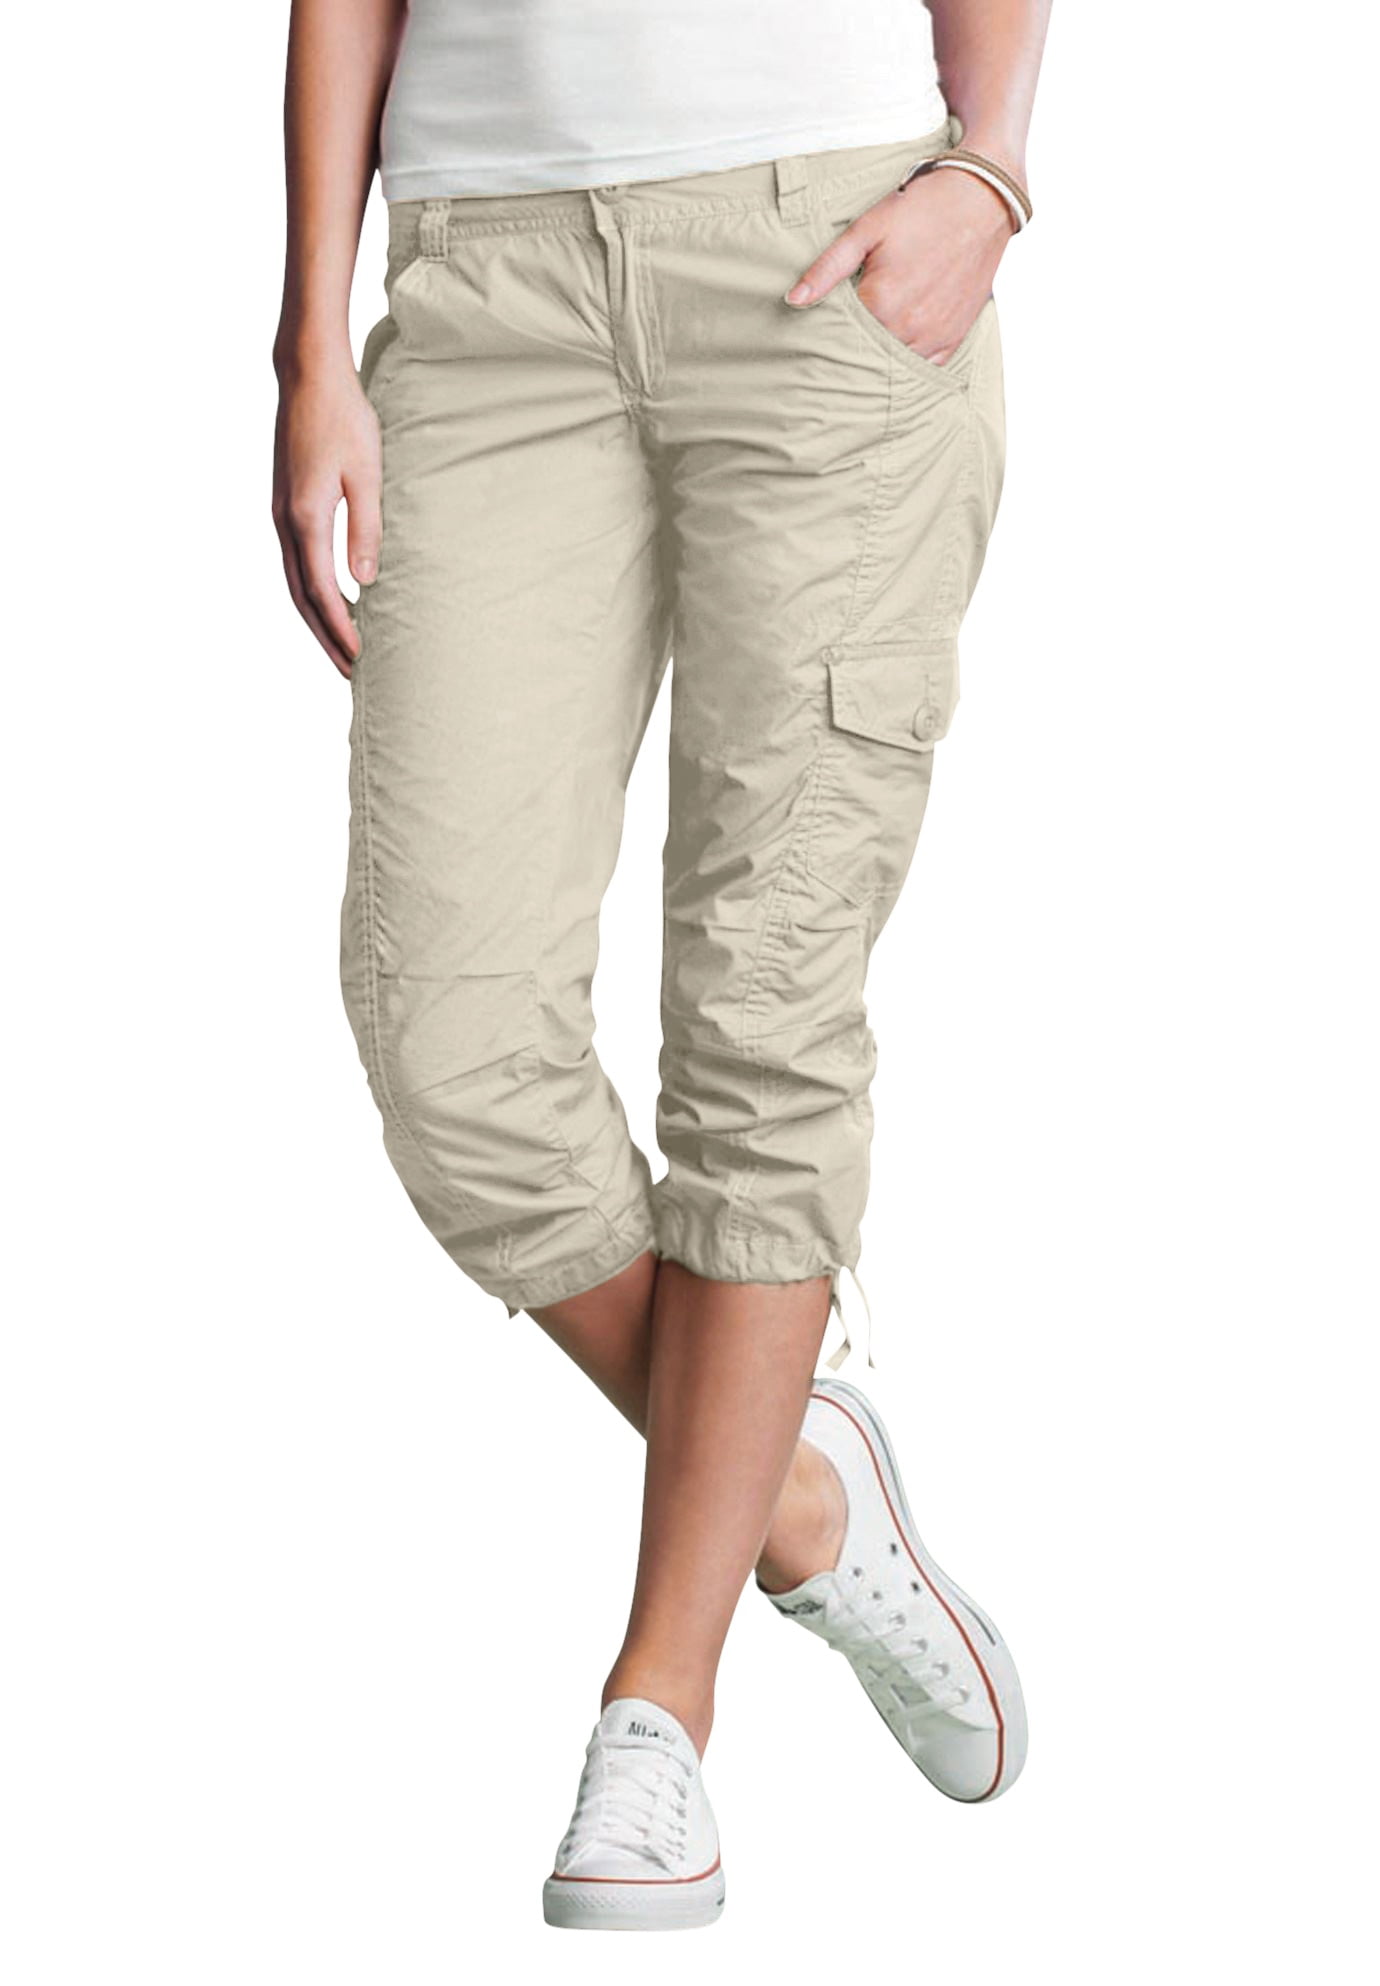 Ellos Women's Plus Size Stretch Cargo Capris Front and Side